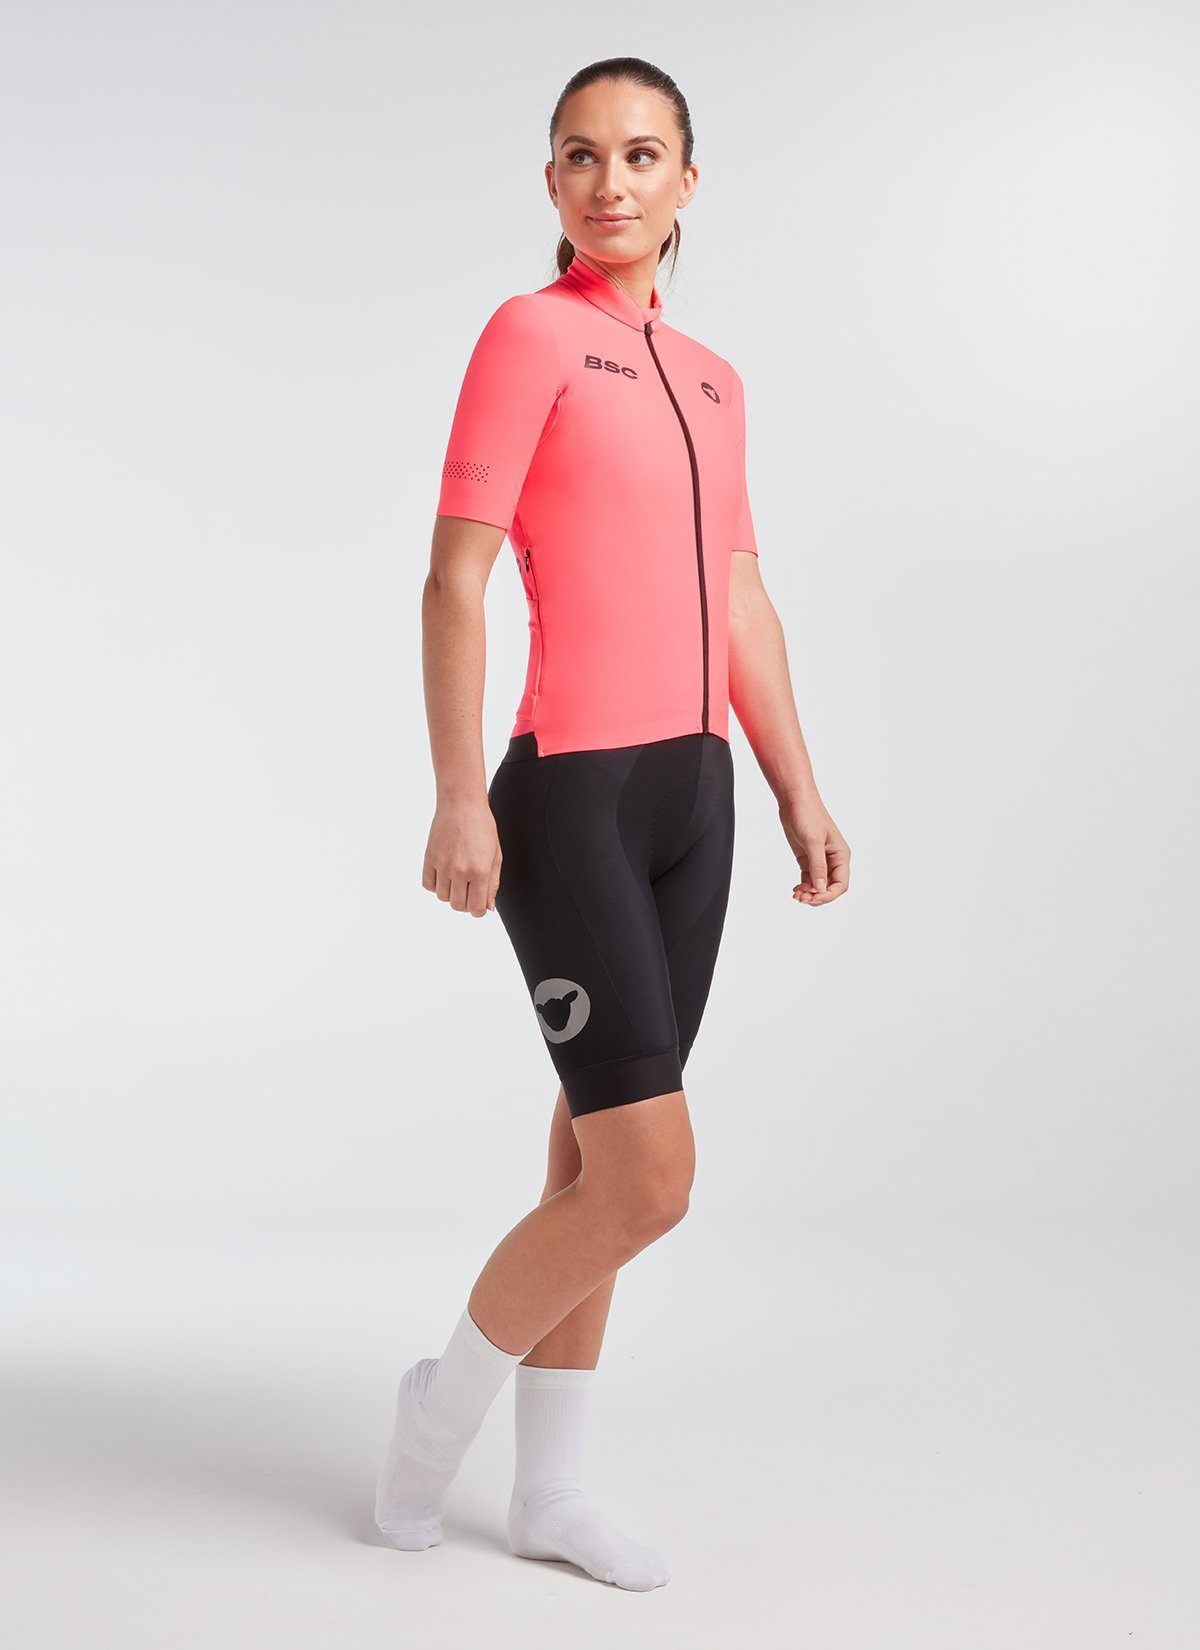 Women's Elements SS Thermal Jersey - Neon Pink